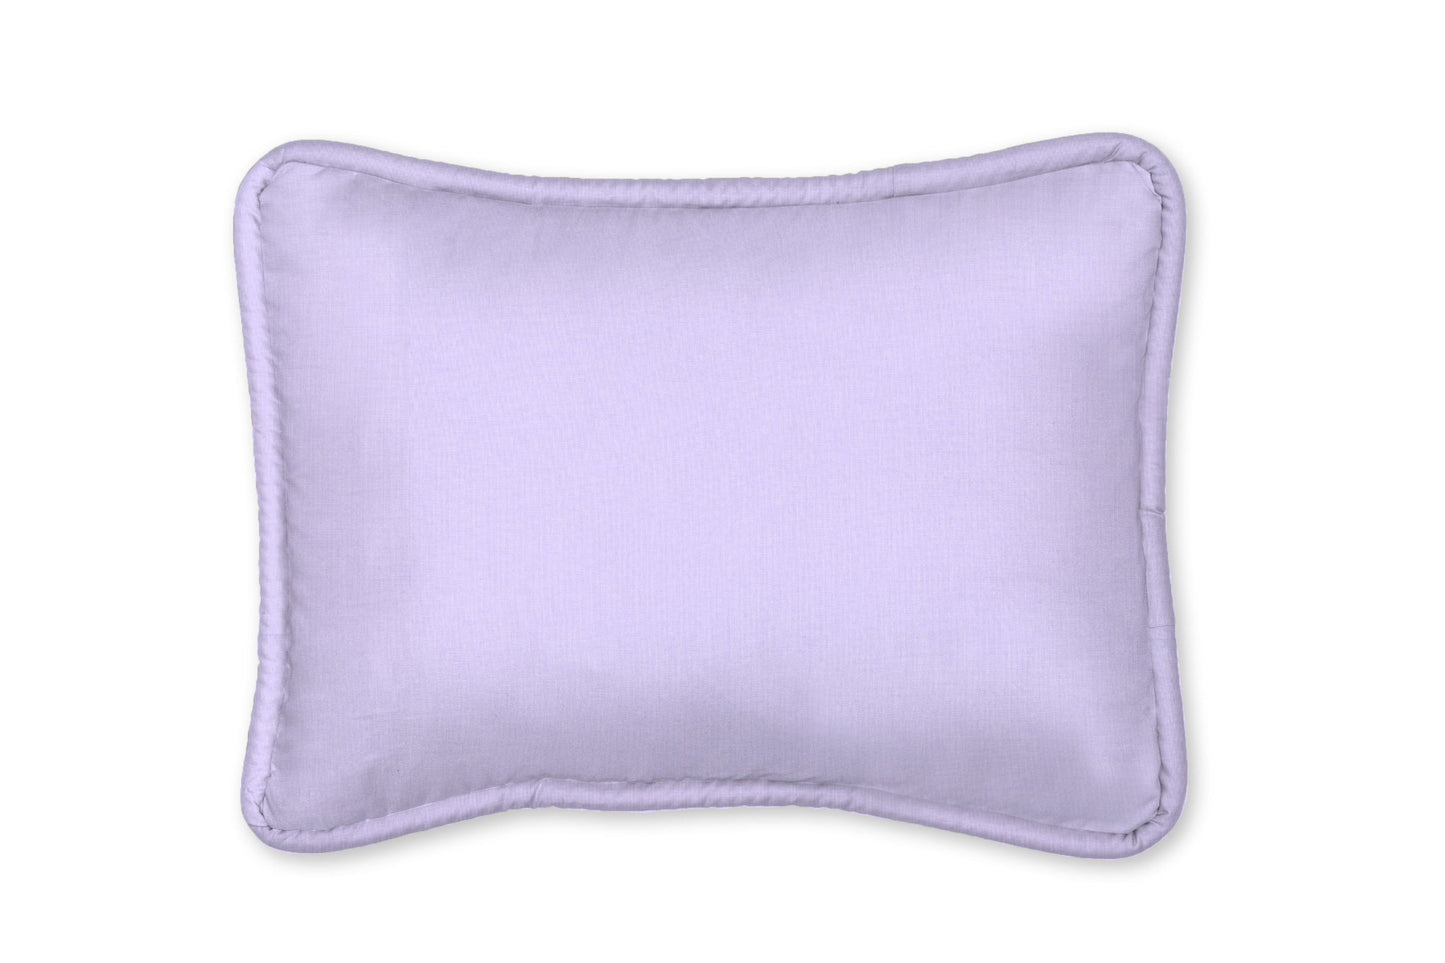 Solid Lilac Decorative Pillow with Piping - New Arrivals Inc